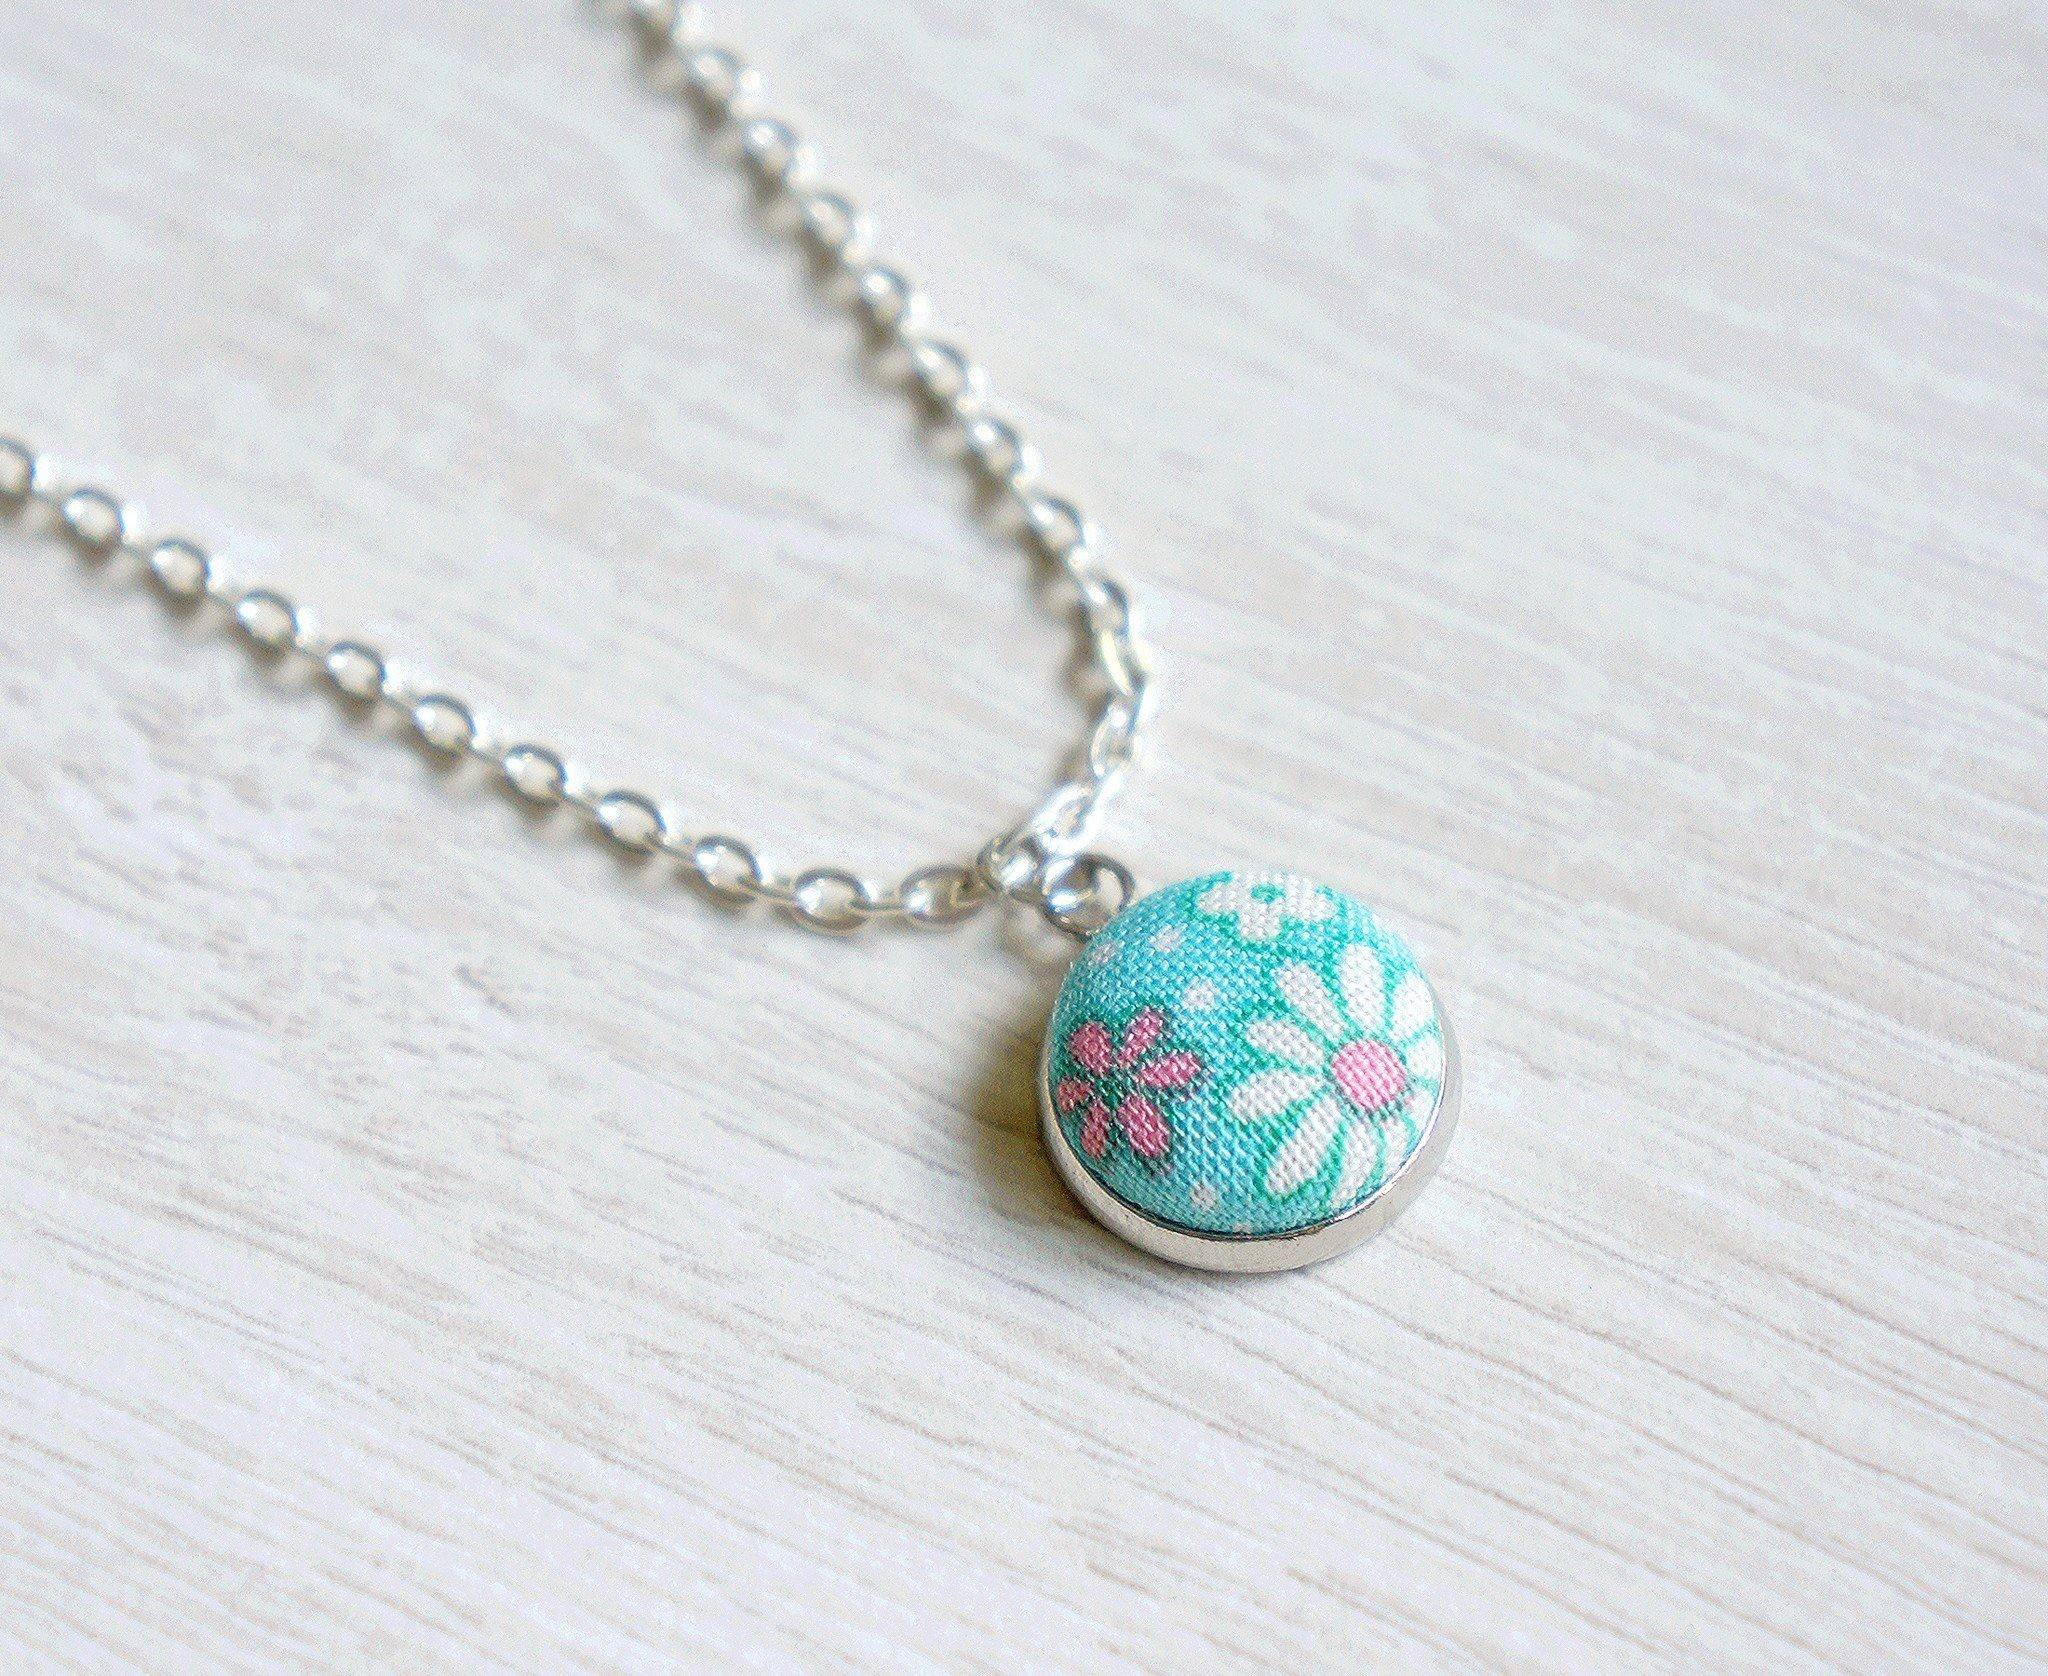 Daisy Spring Handmade Fabric Button Necklace - Necklaces - Paperdaise Accessories - Naiise